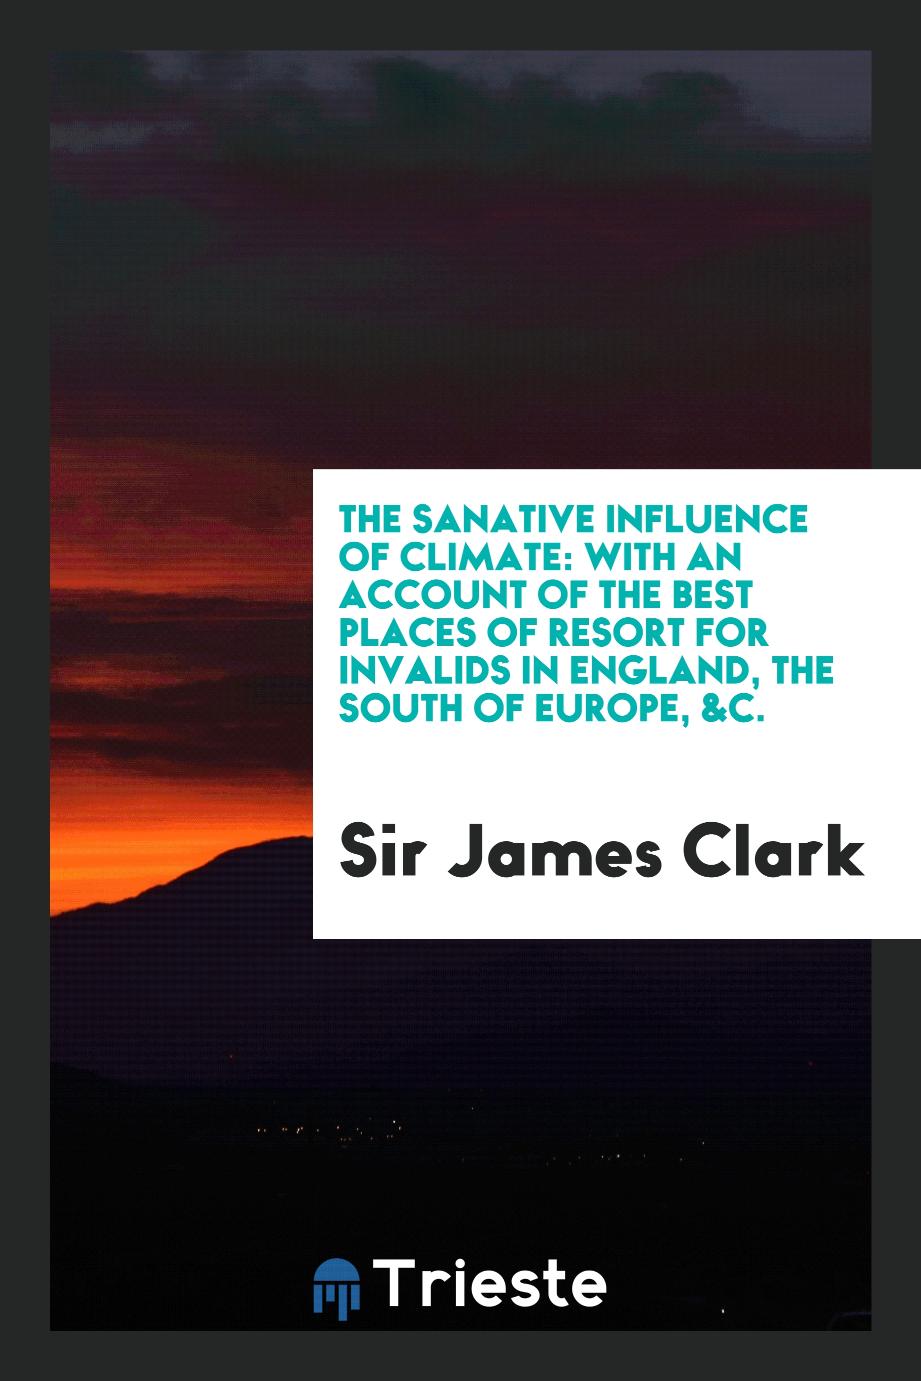 The sanative influence of climate: with an account of the best places of resort for invalids in England, the south of Europe, &c.